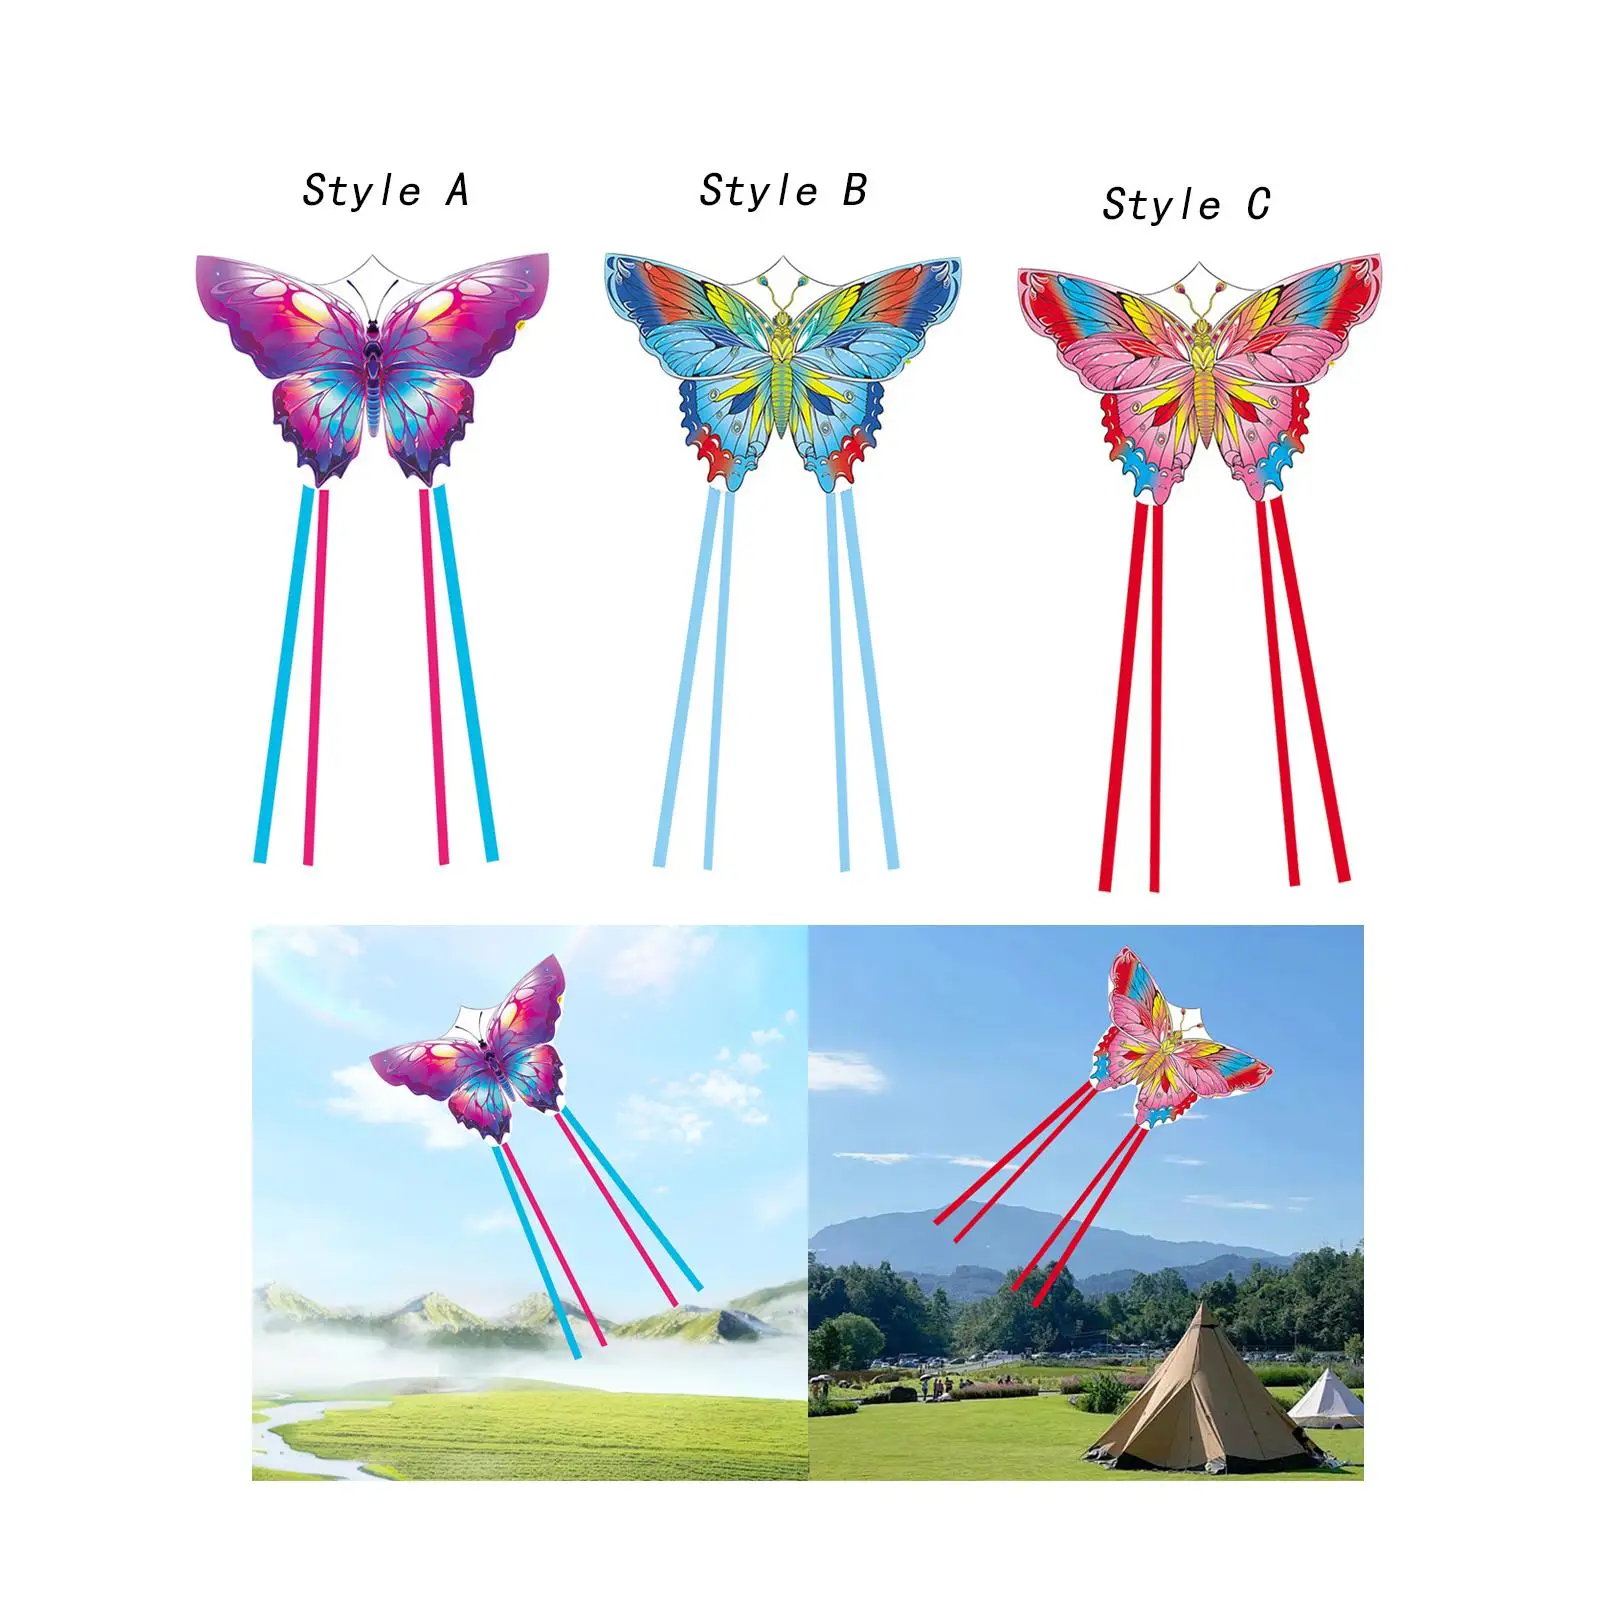 Huge Kite for Adults Kids Easy Flying Eye Catching Outdoor Fly Kite Game for Holiday Outdoor Beach Family Parties Birthday Gift